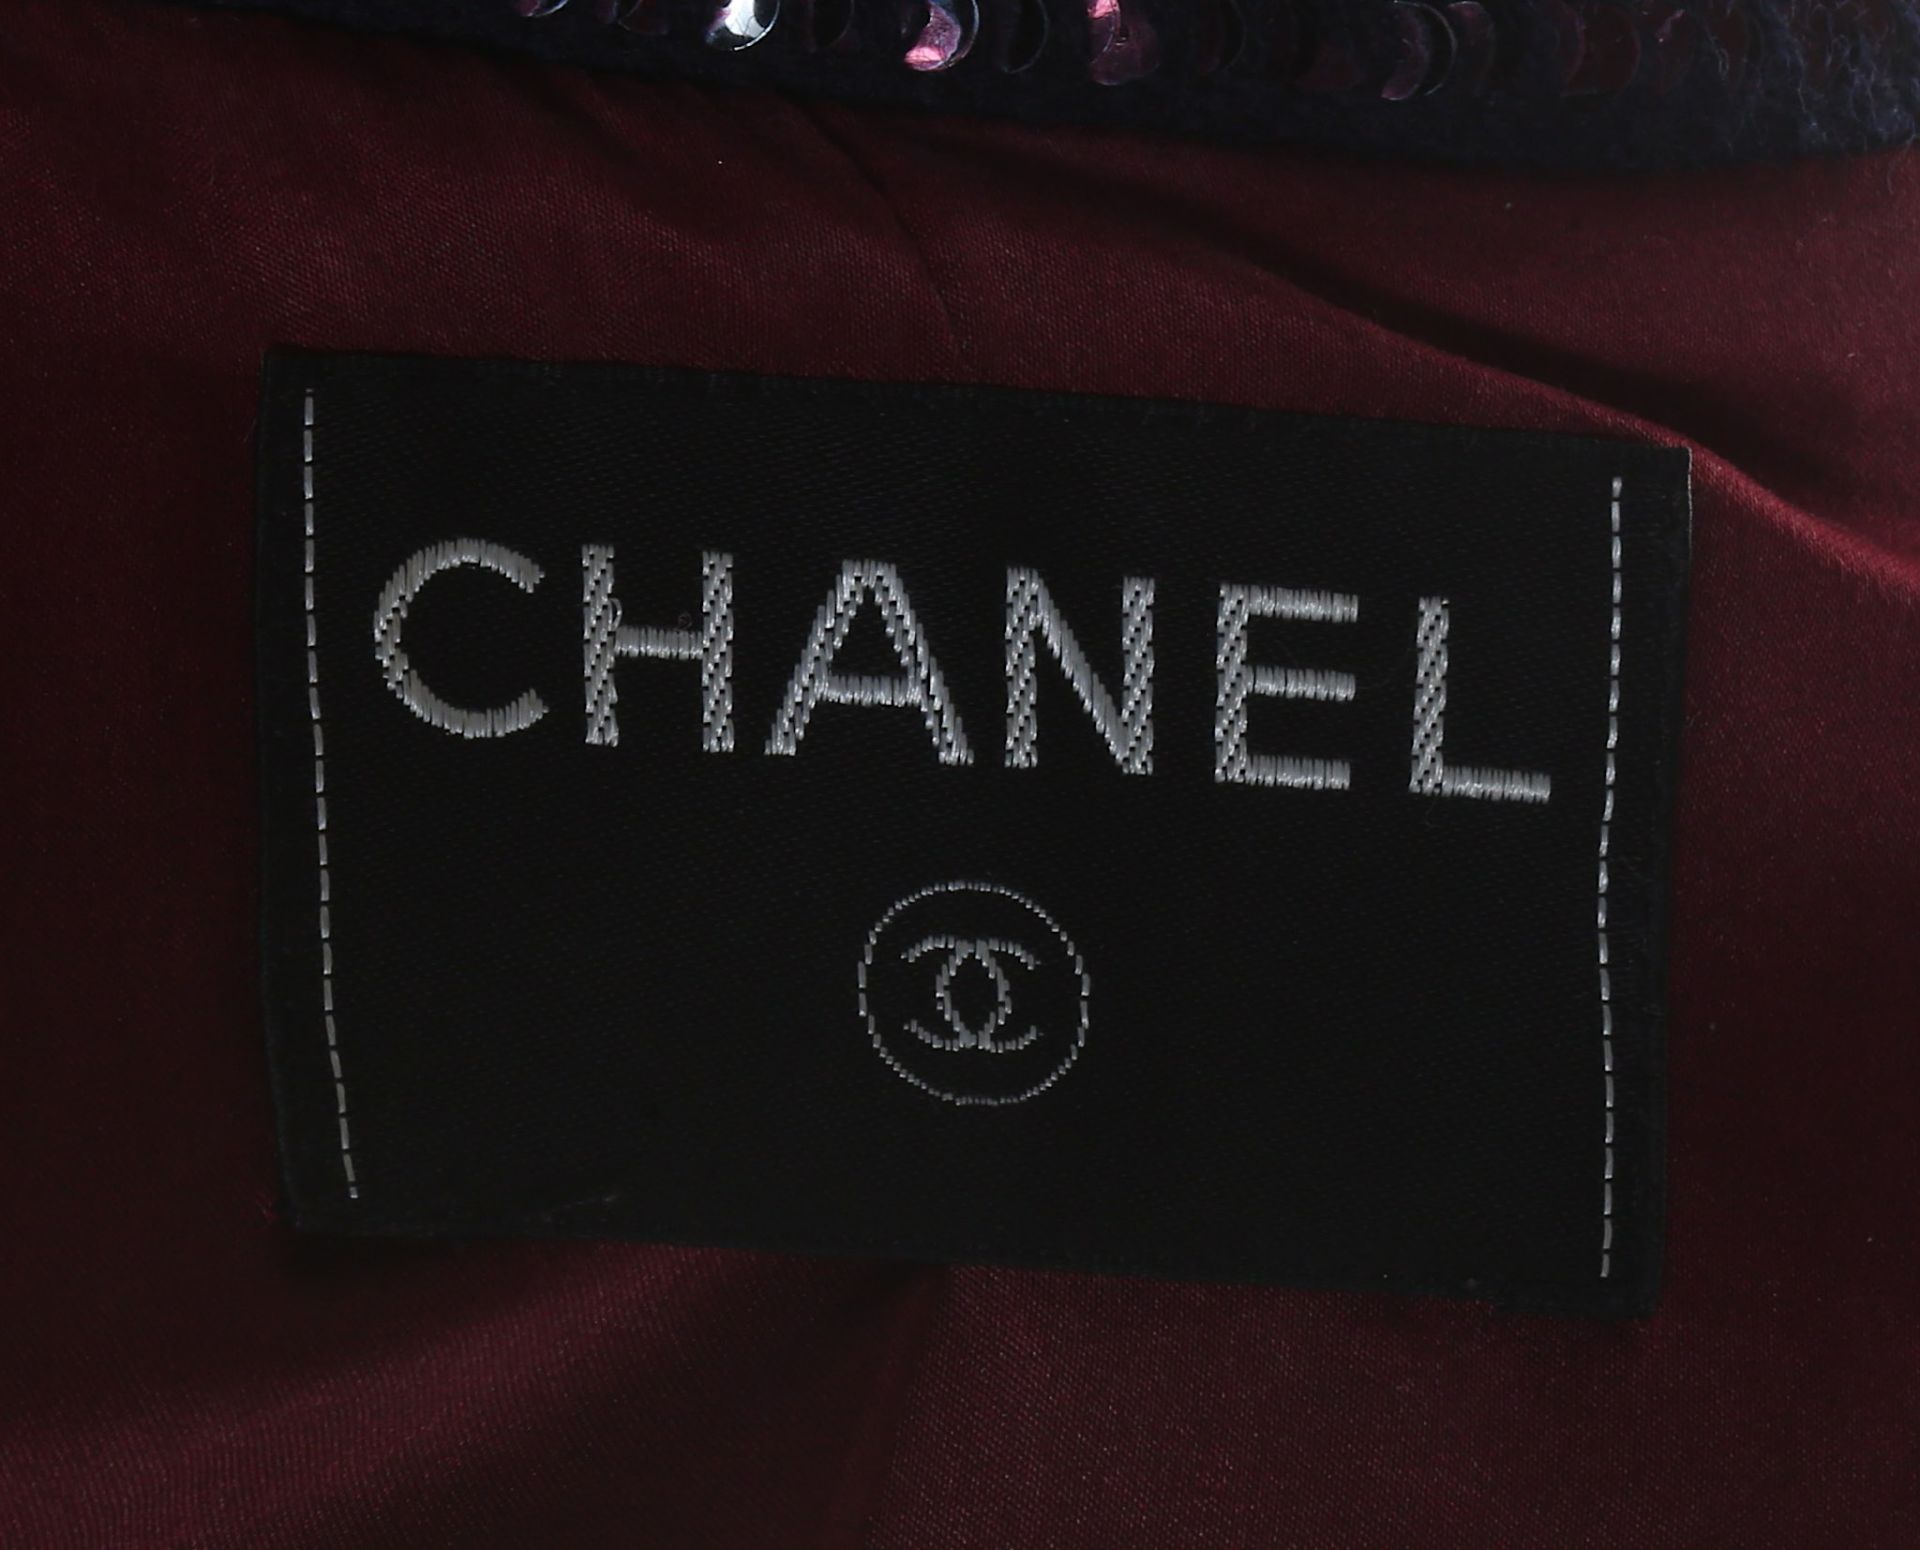 Chanel Navy Wool and Sequin Skirt Suit, c. 2000, n - Image 7 of 7